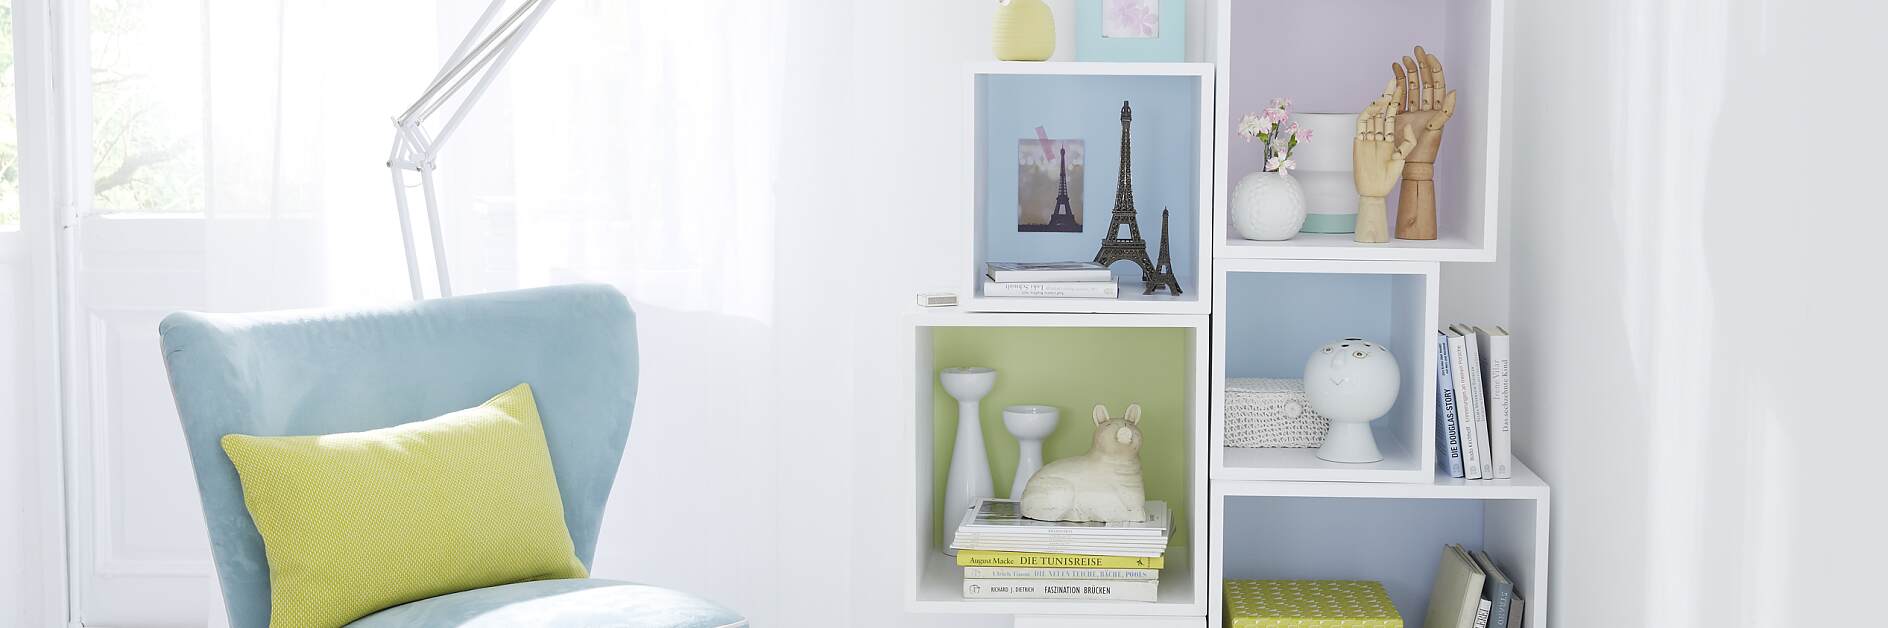 Beautify your shelves with color